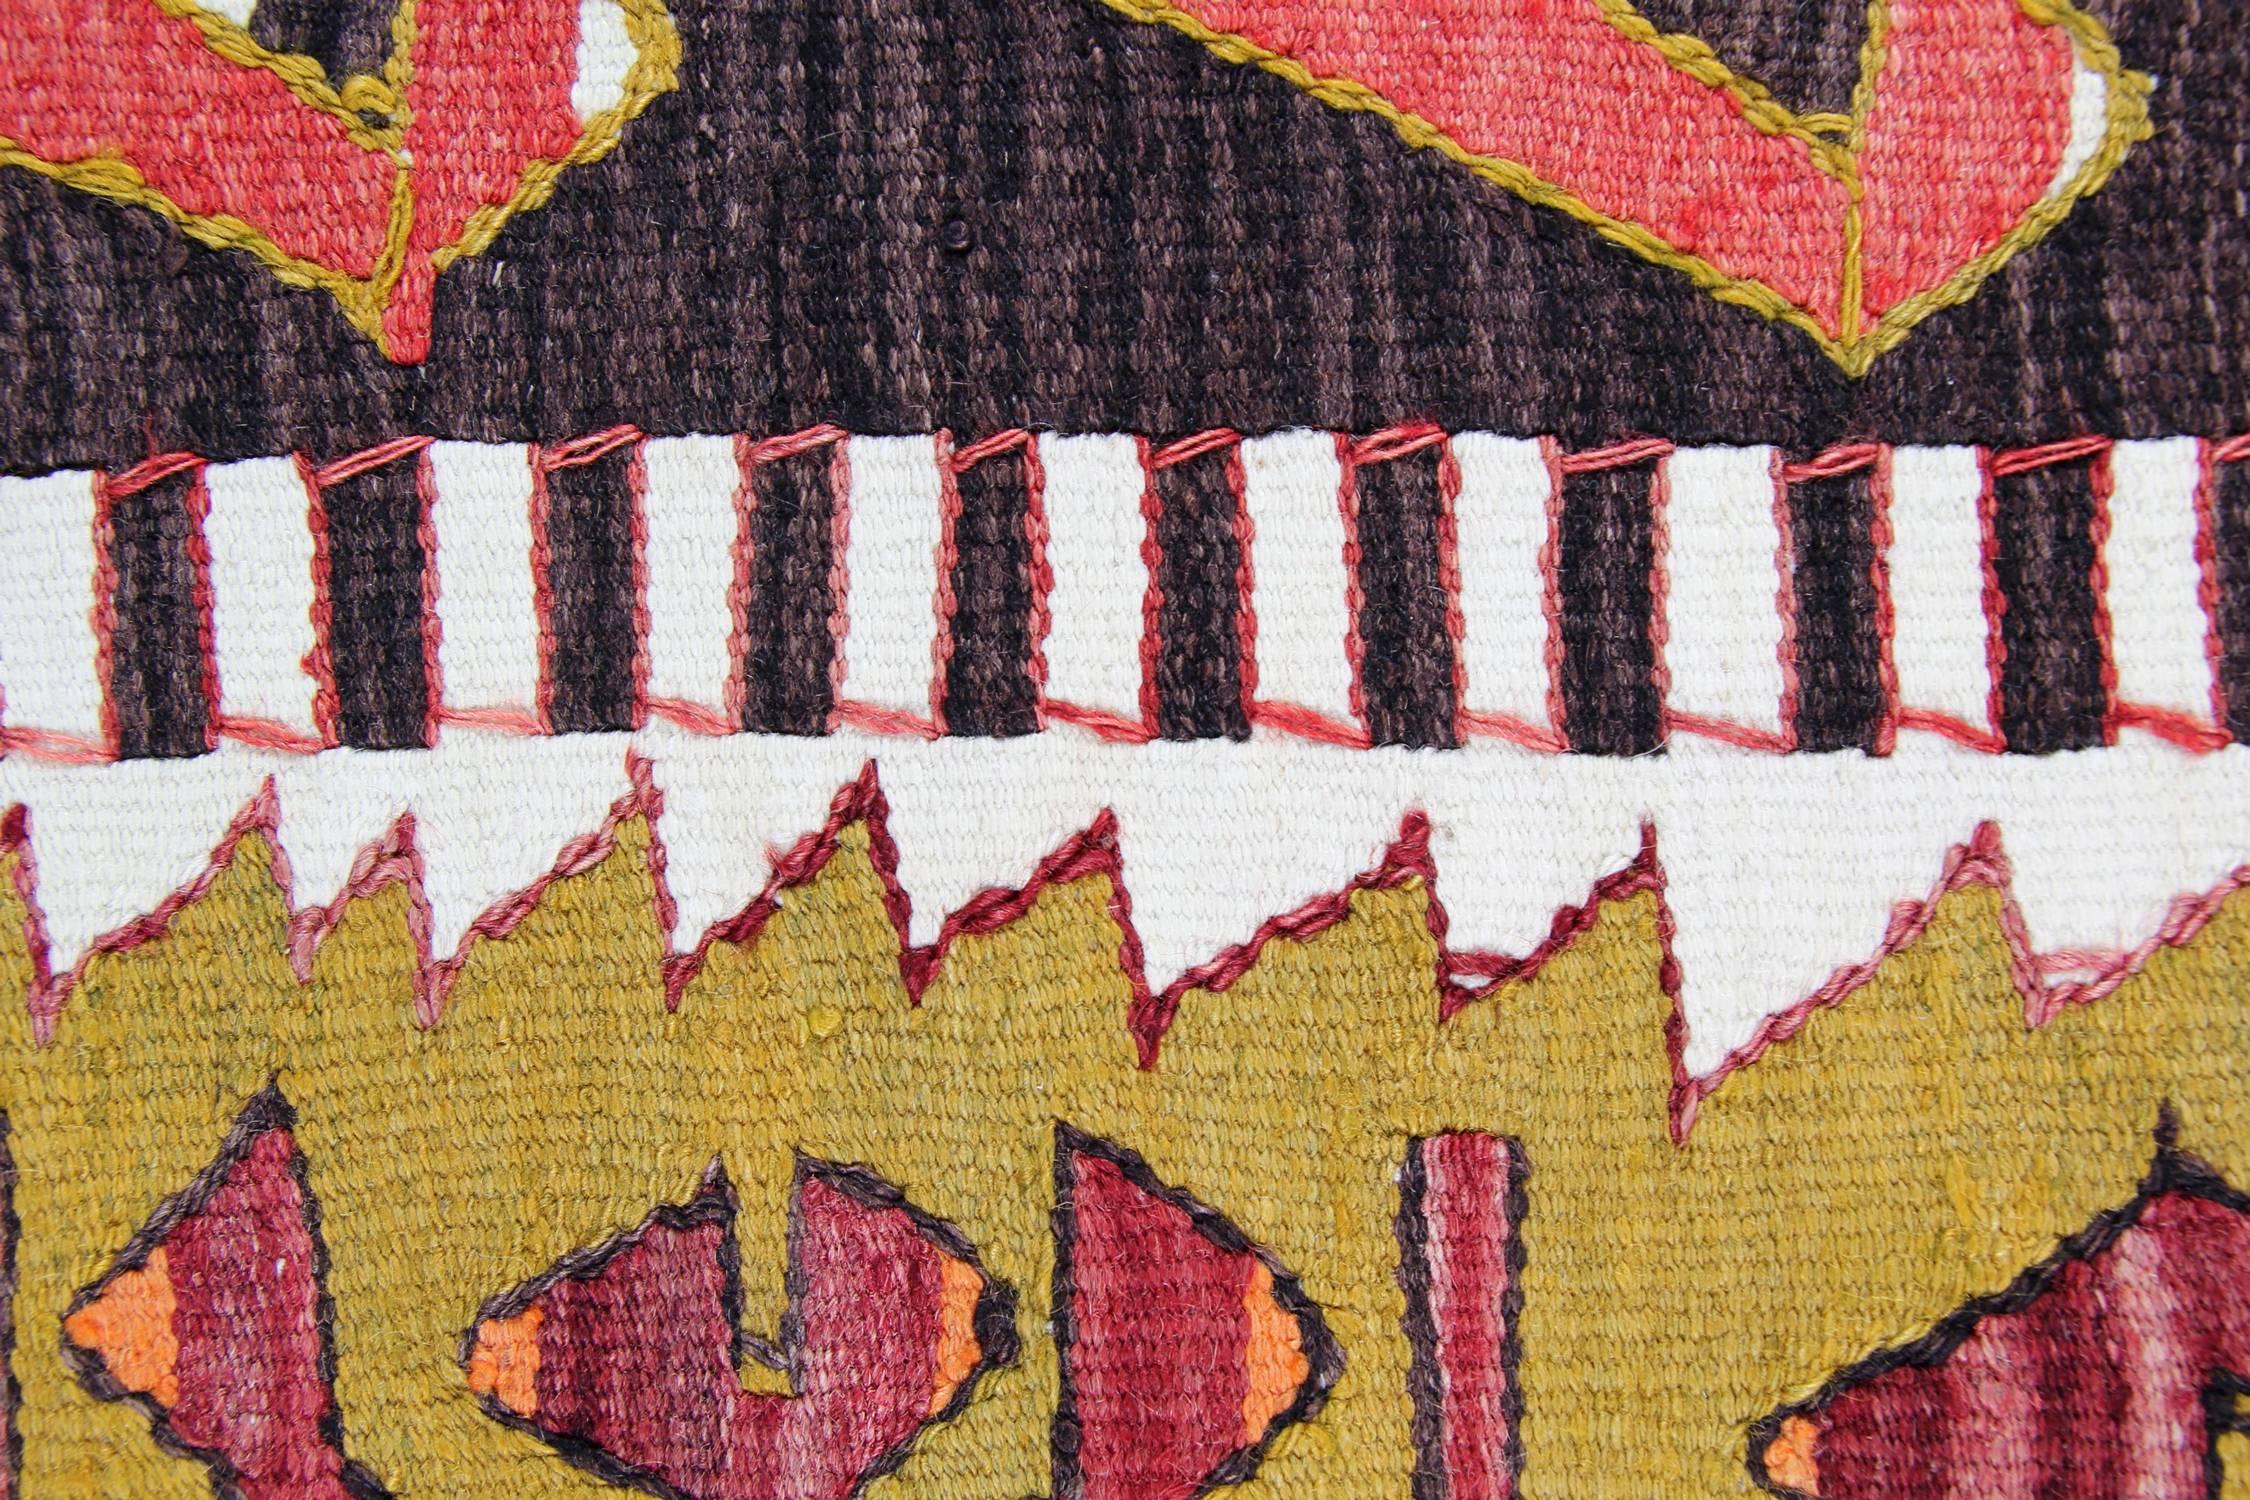 Hand-Crafted Antique Kilim Rugs, Traditional Oriental Rugs, Turkish Handmade Carpet for Sale For Sale